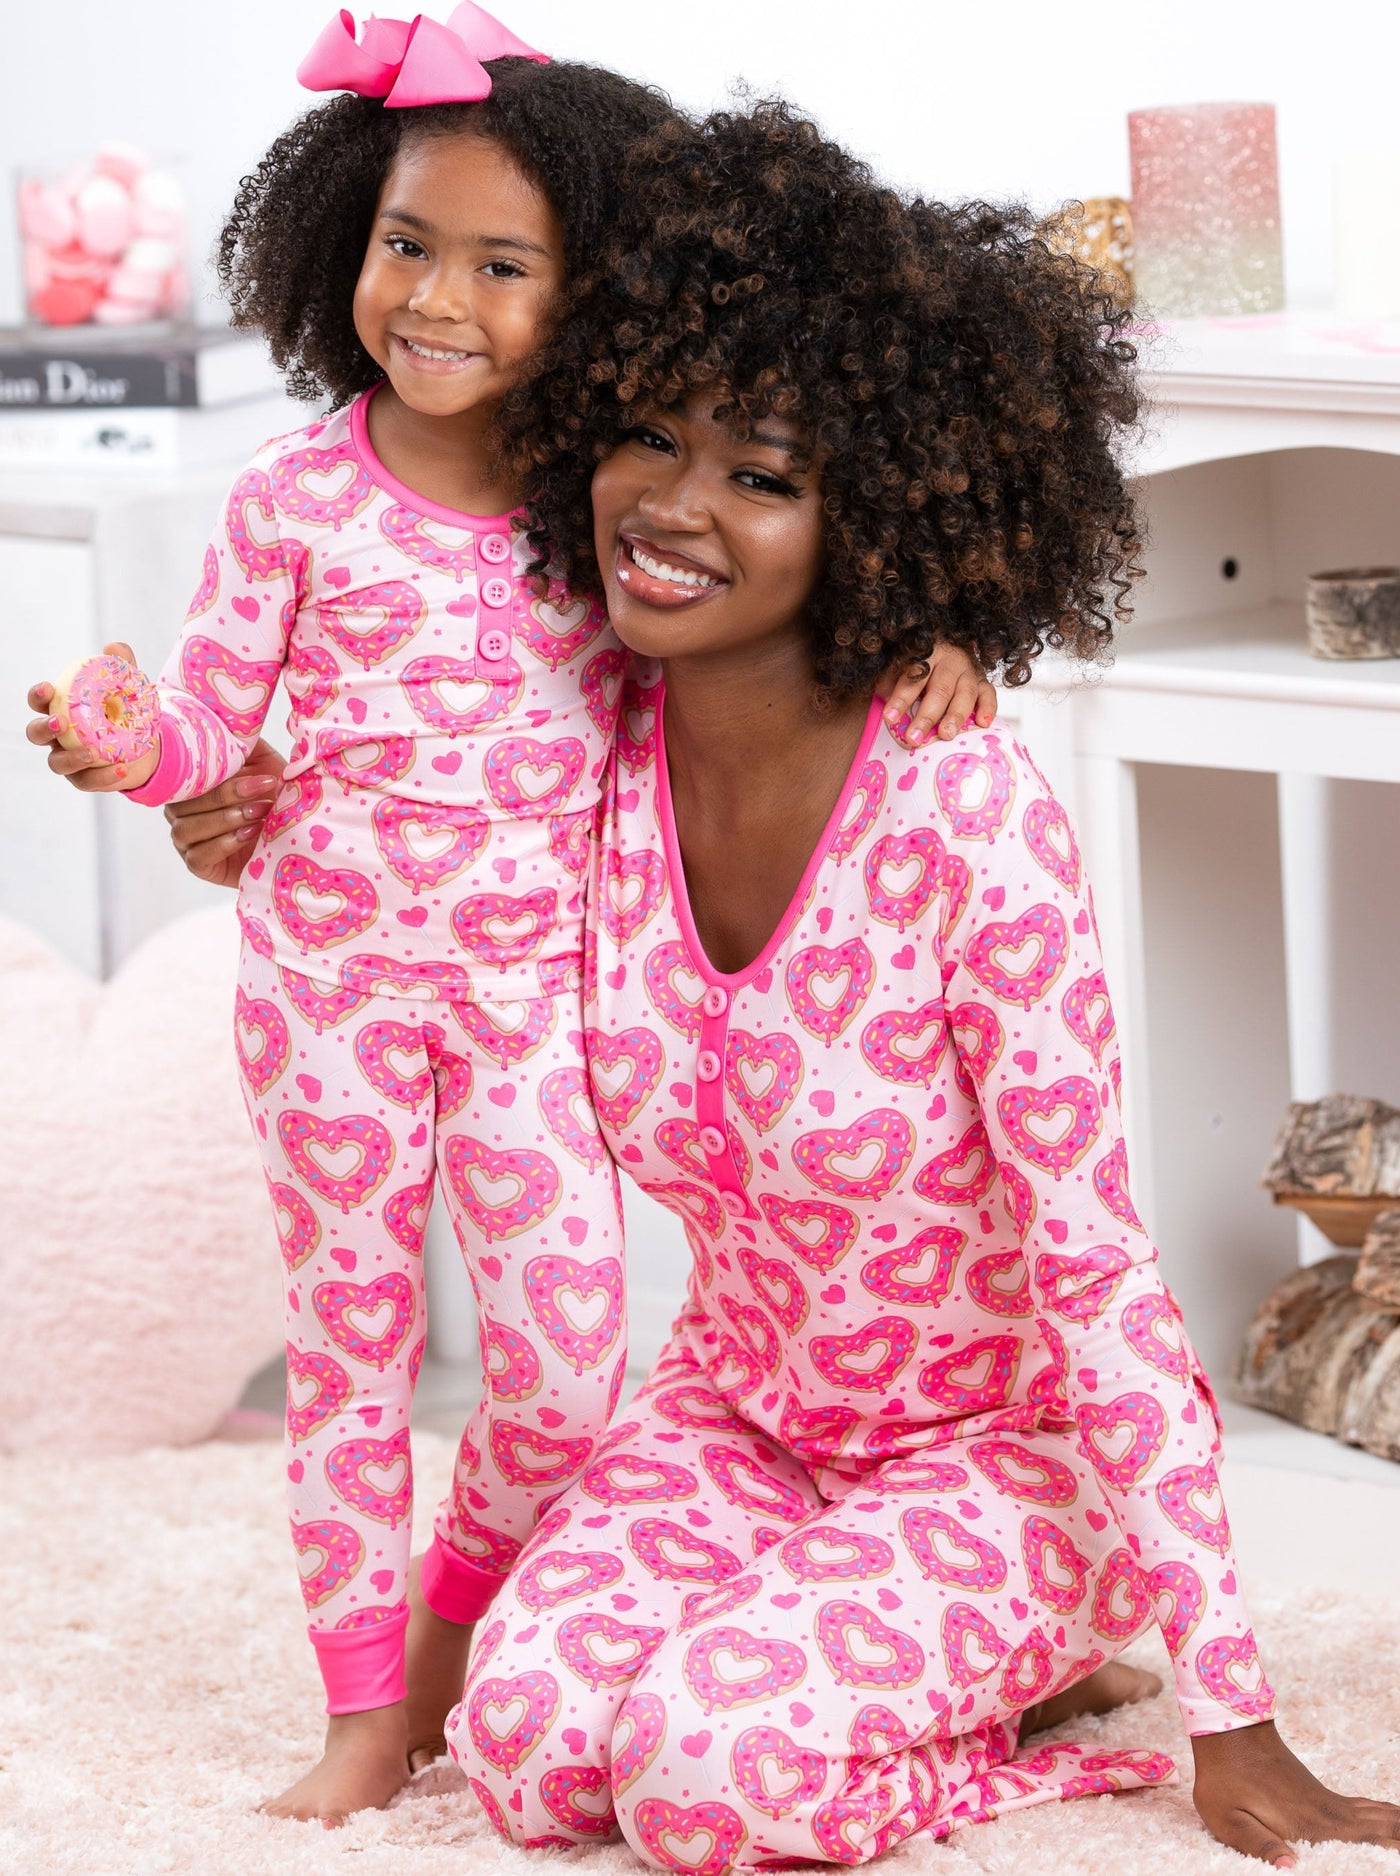 Mommy And Me Sprinkle Love Everywhere Pajama Set - Mia Belle Girls